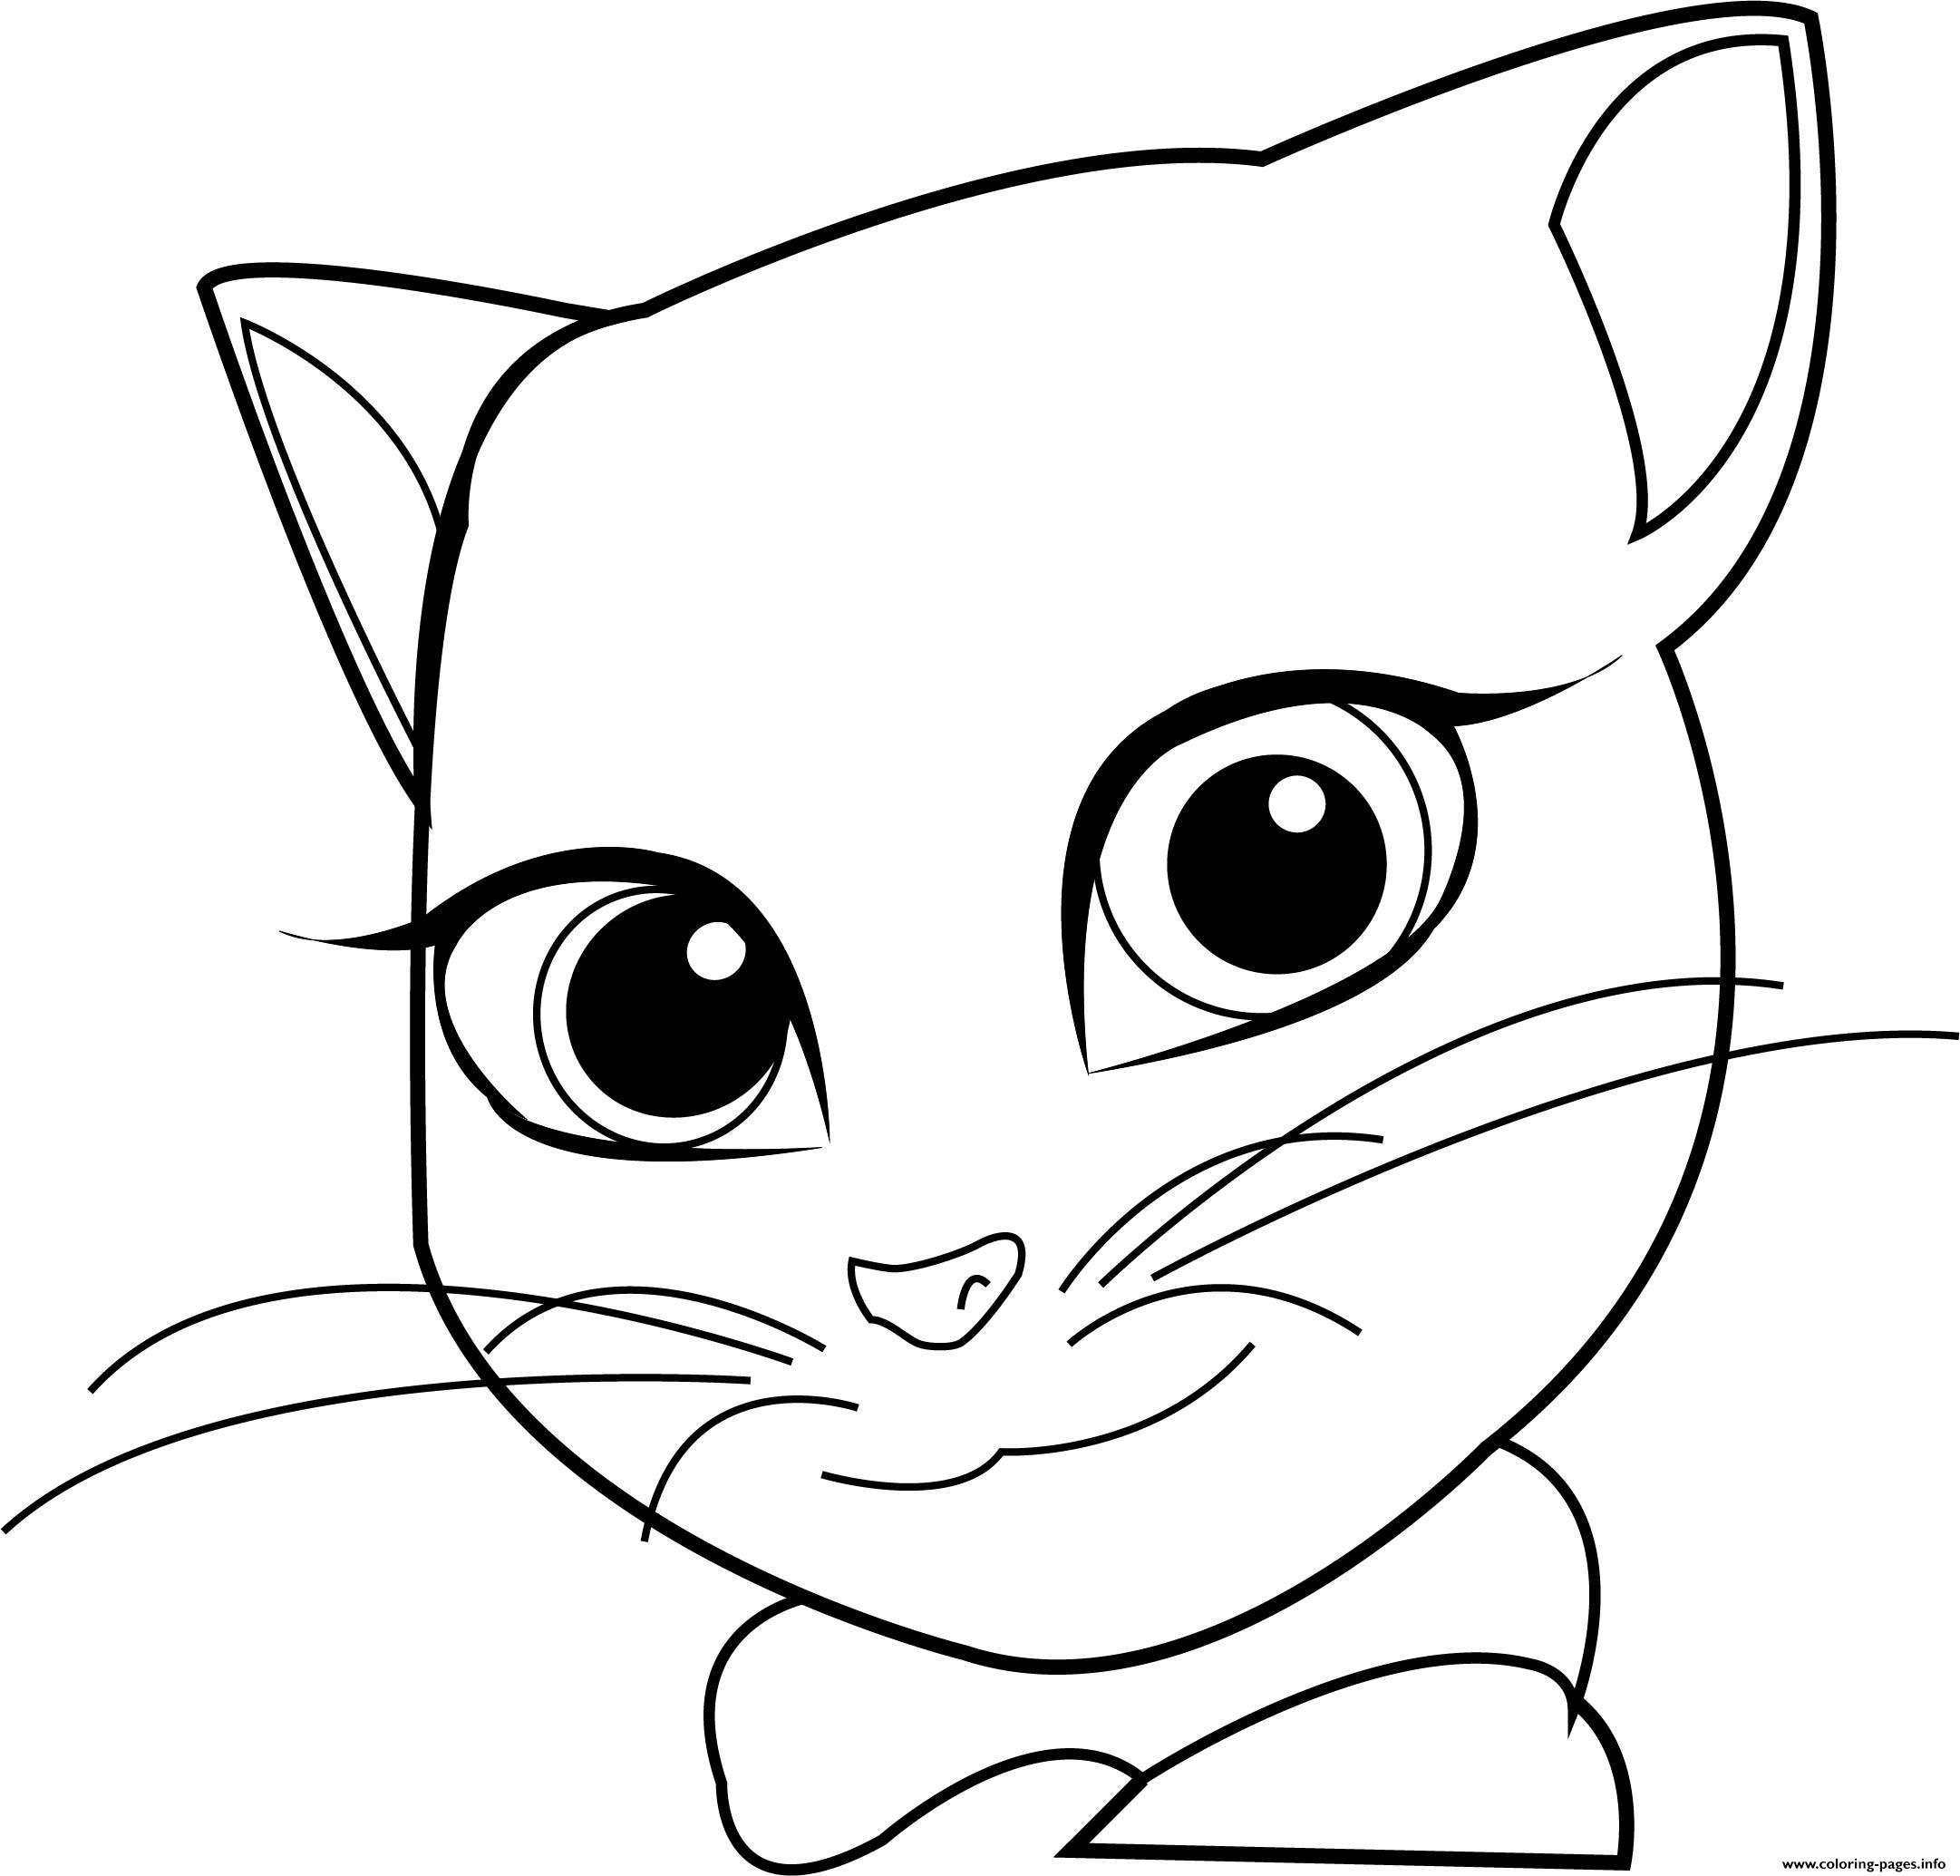 Talking Tom Coloring Pages - Free Coloring Pages